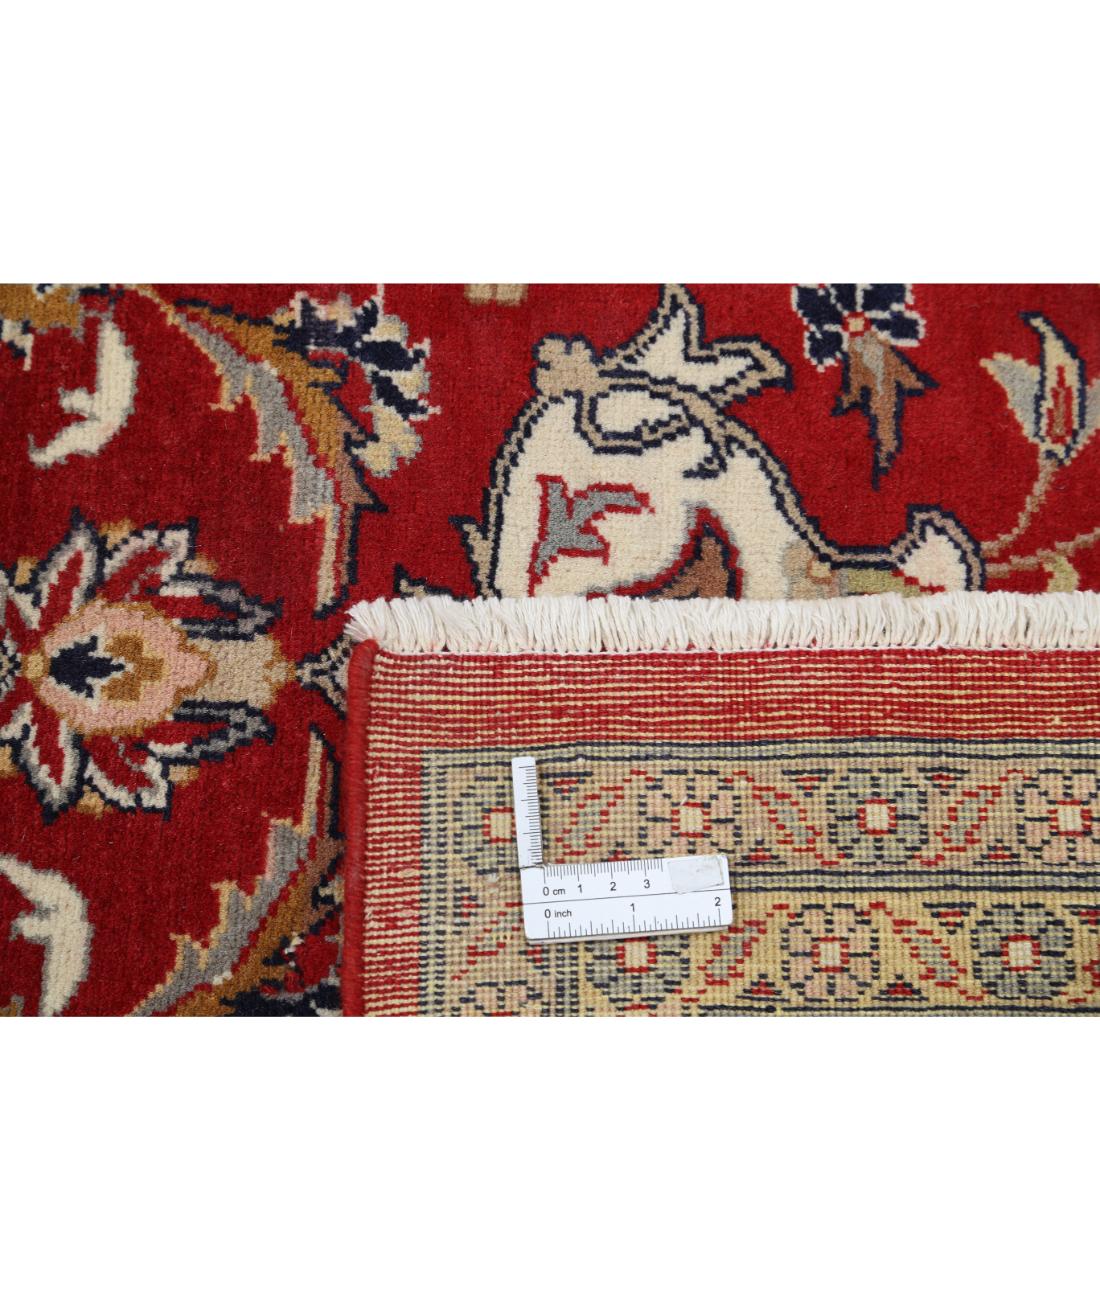 Heritage 6' 0" X 9' 3" Hand-Knotted Wool Rug 6' 0" X 9' 3" (183 X 282) / Red / Ivory